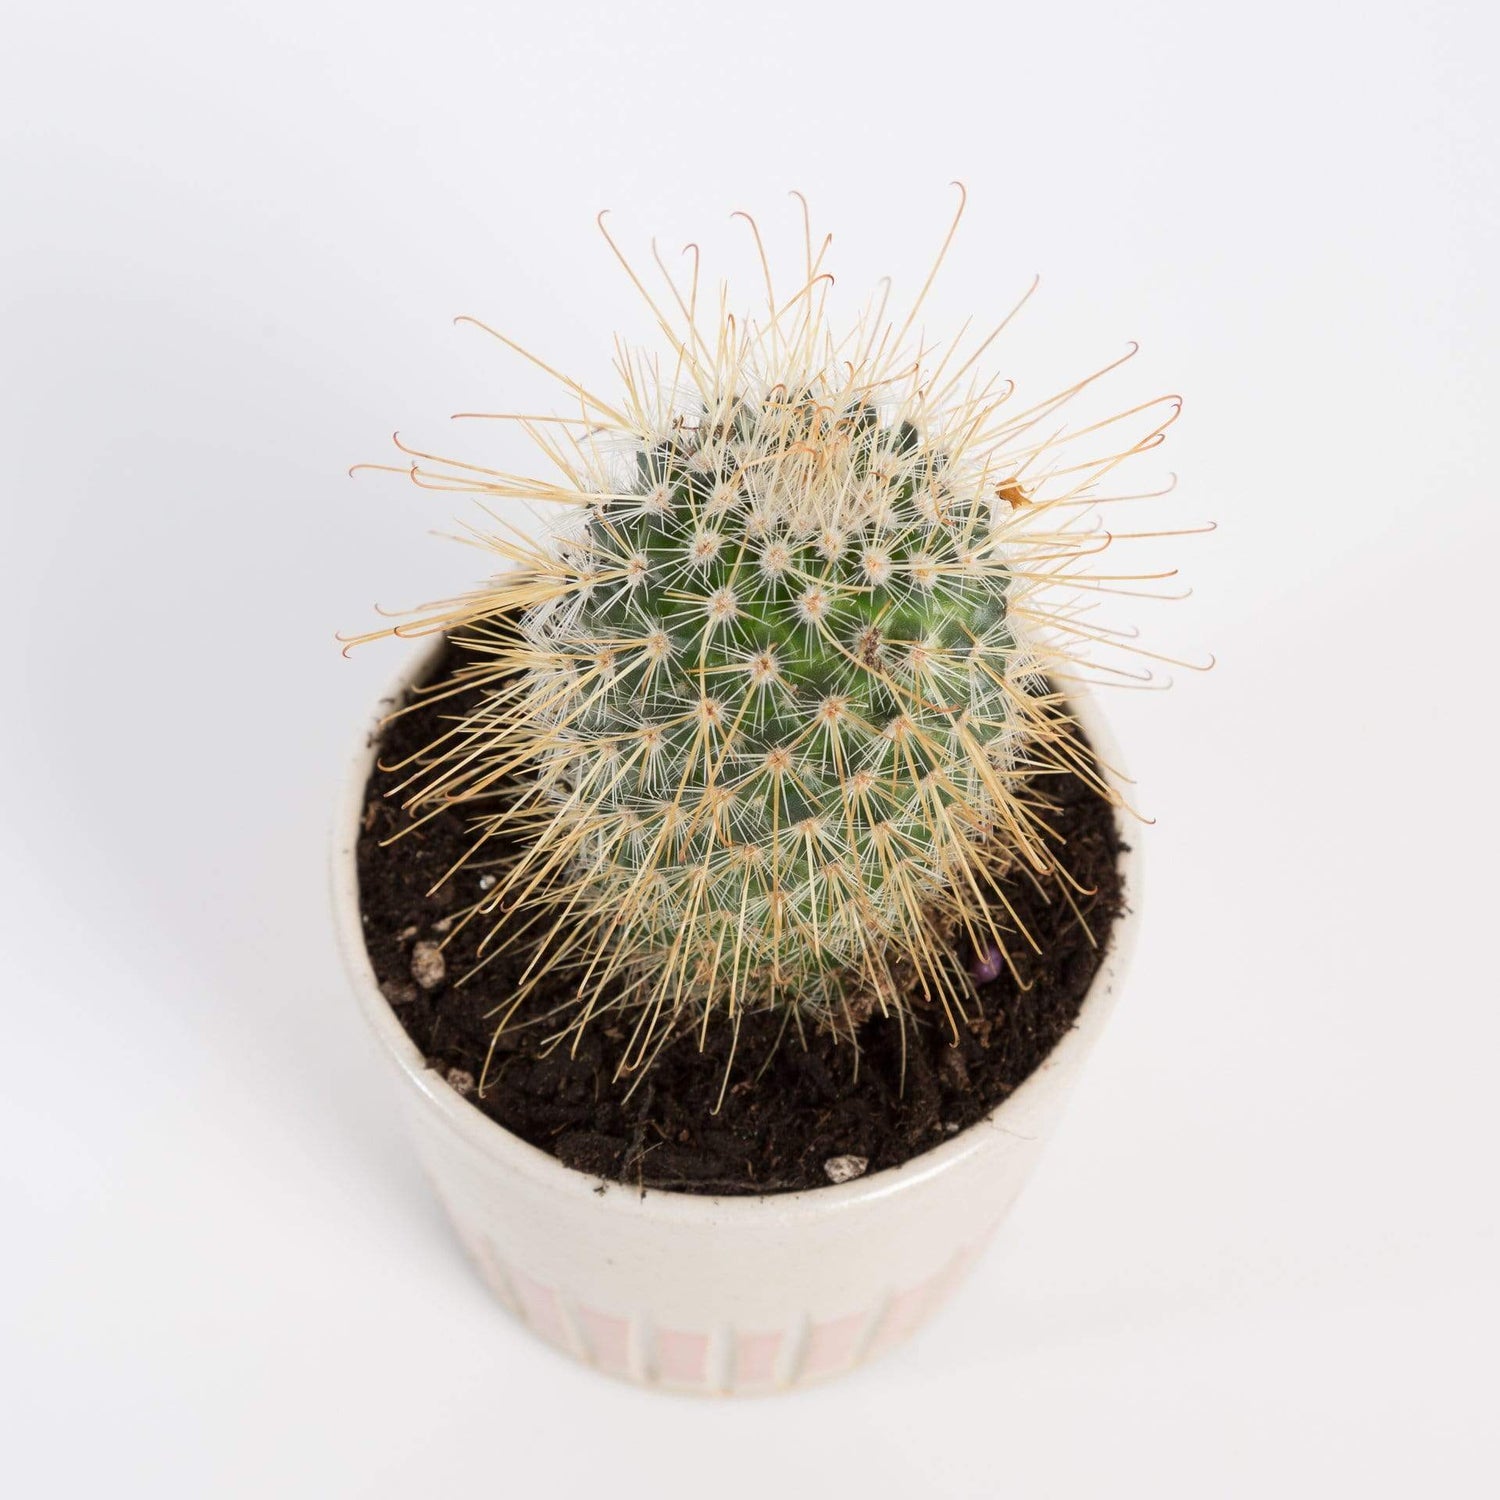 Urban Sprouts Plant 4" in nursery pot Cactus 'Fish Hook Sp'